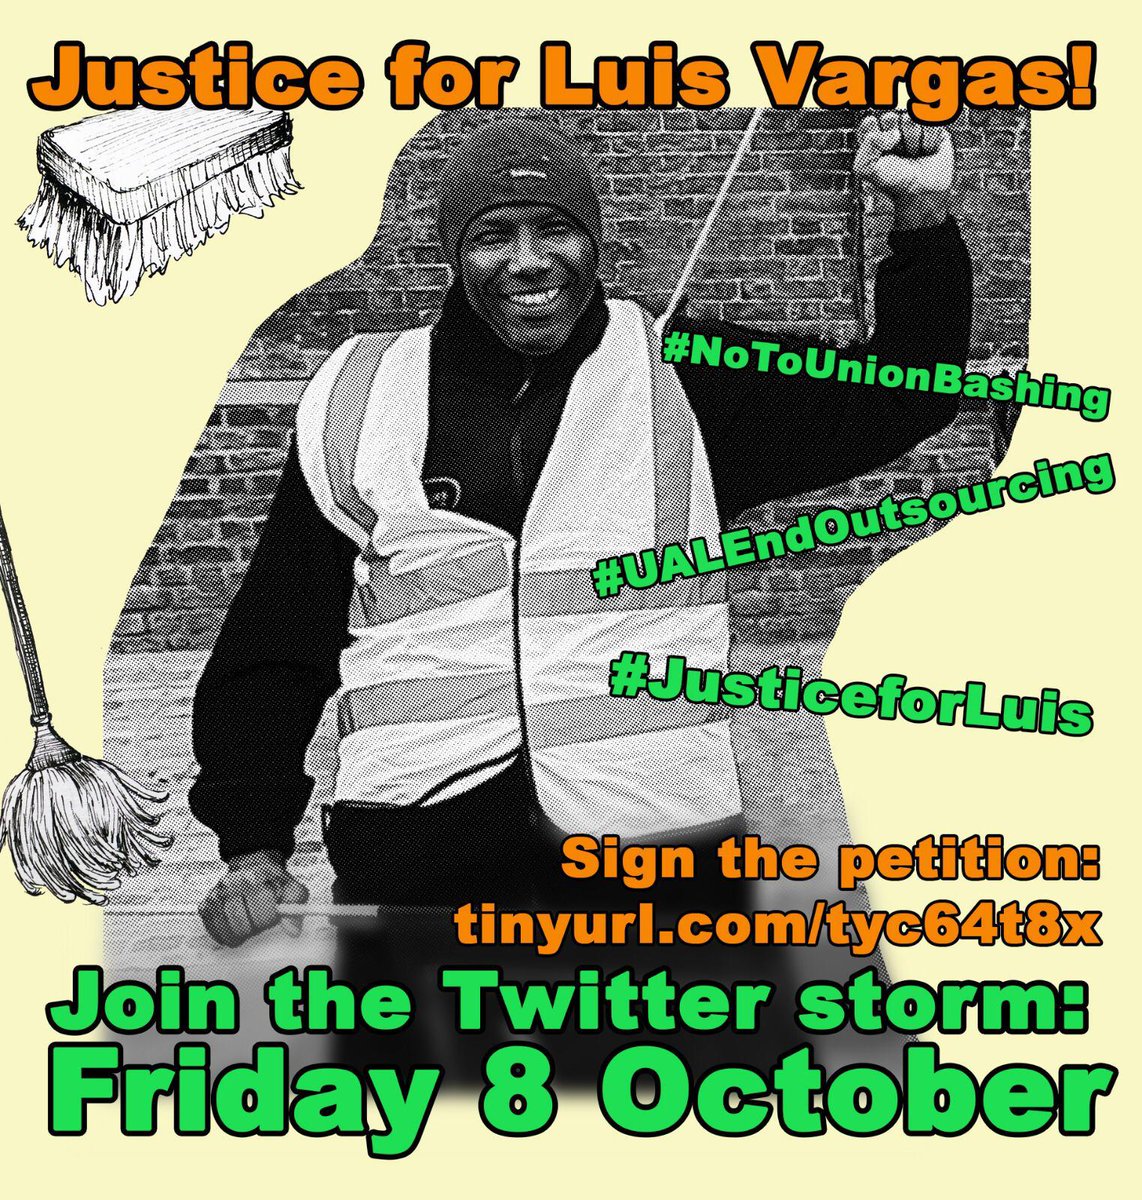 Pls continue to watch and share Luis's video. It is so important we tell @UAL @csm_news how shameful it is to have BAME cleaners and trade union activists victimised in this way! #UALEndOutsourcing #JusticeForLuis #SaveStella Pls sign the petition: actionnetwork.org/petitions/just…